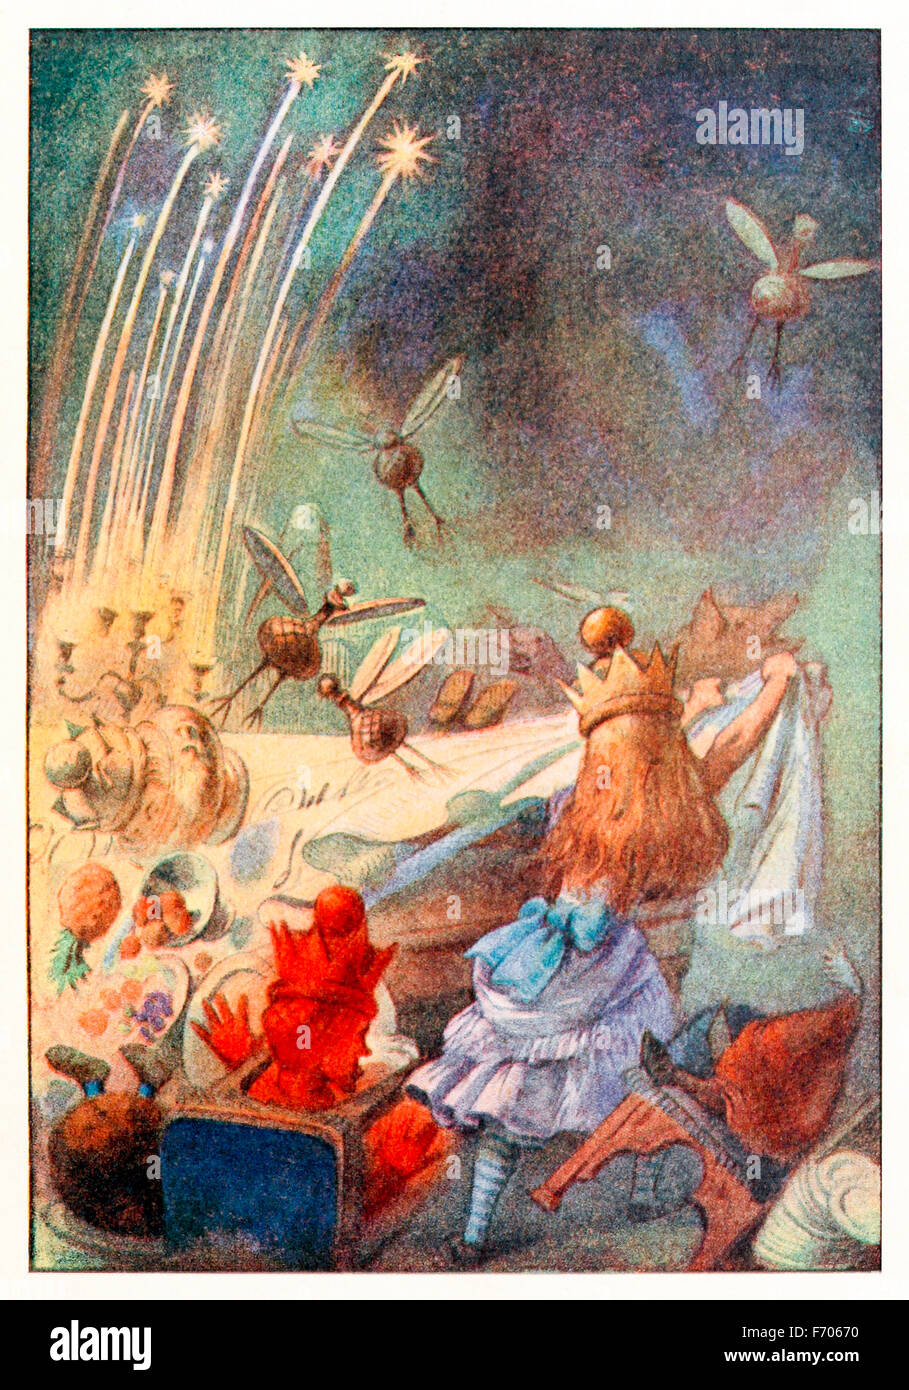 'One good pull, and plates, dishes, guests, and candles came crashing down together in a heap' from 'Through the Looking-Glass and What Alice Found There' by Lewis Carroll (1832-1898), illustrated by Sir John Tenniel. See description for more information. Stock Photo